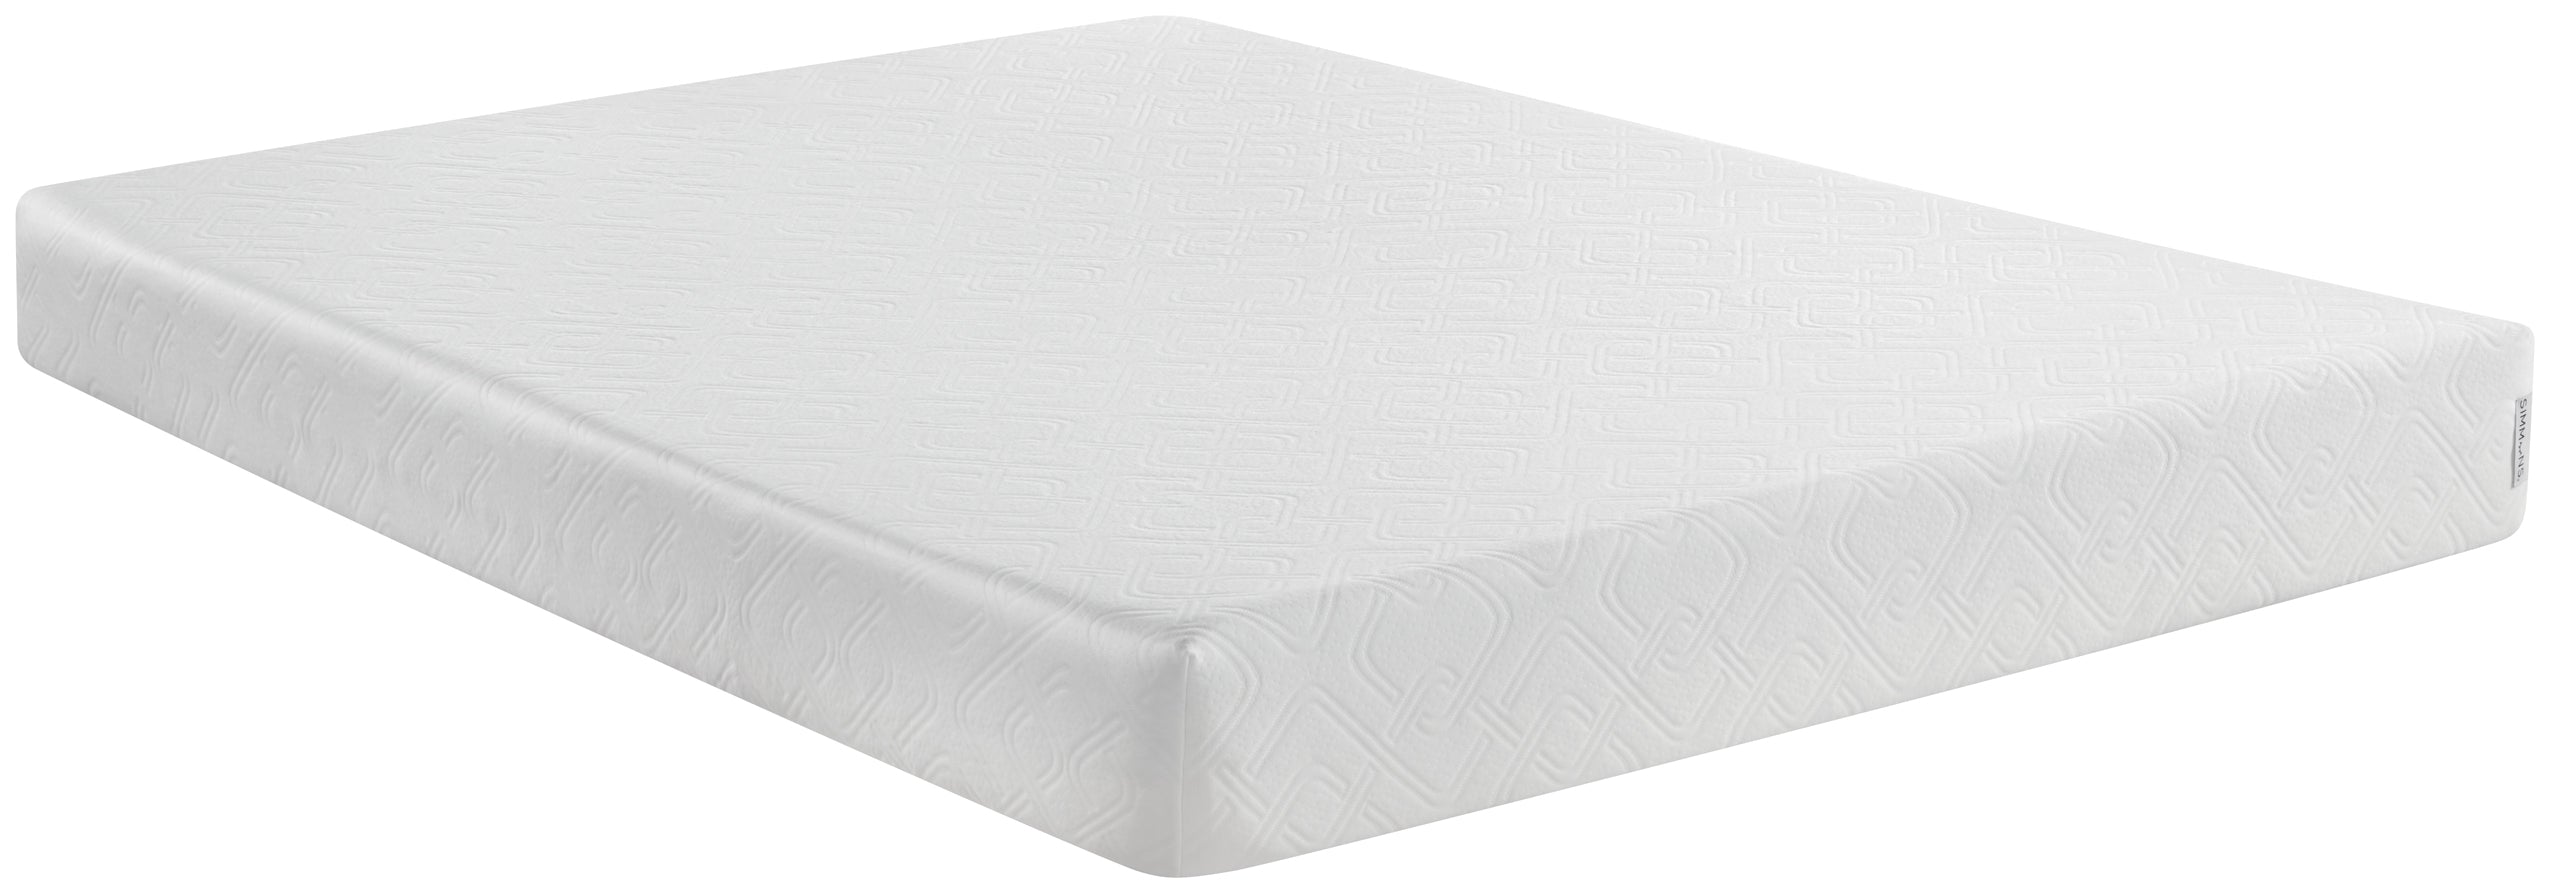 Firm Support Memory Foam Mattress in a Box from Simmons.com